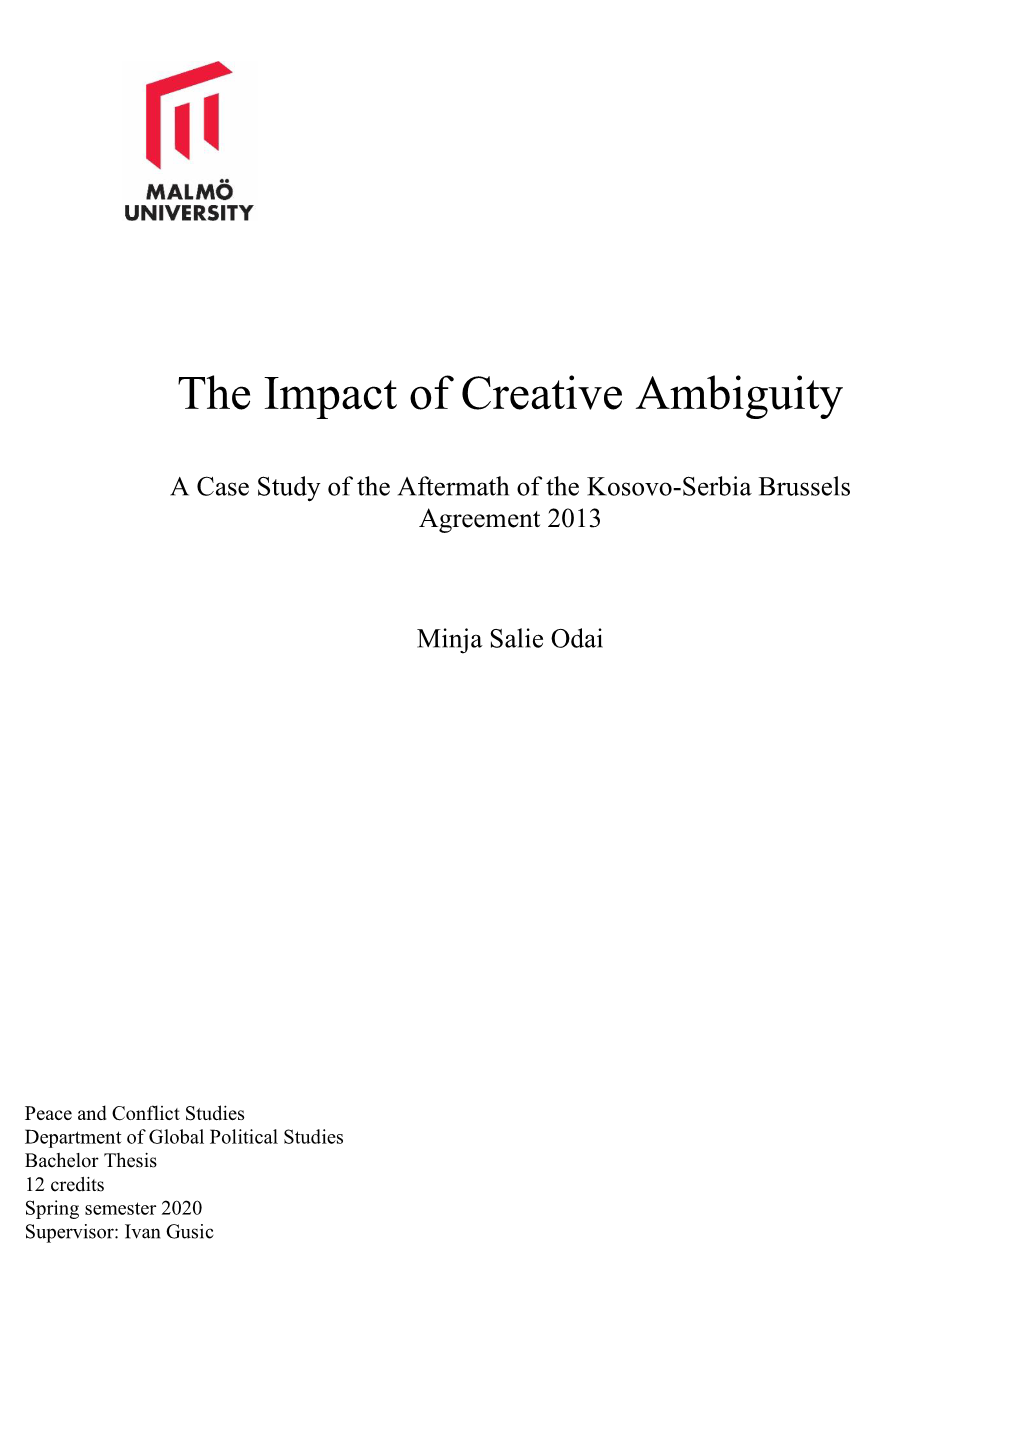 The Impact of Creative Ambiguity